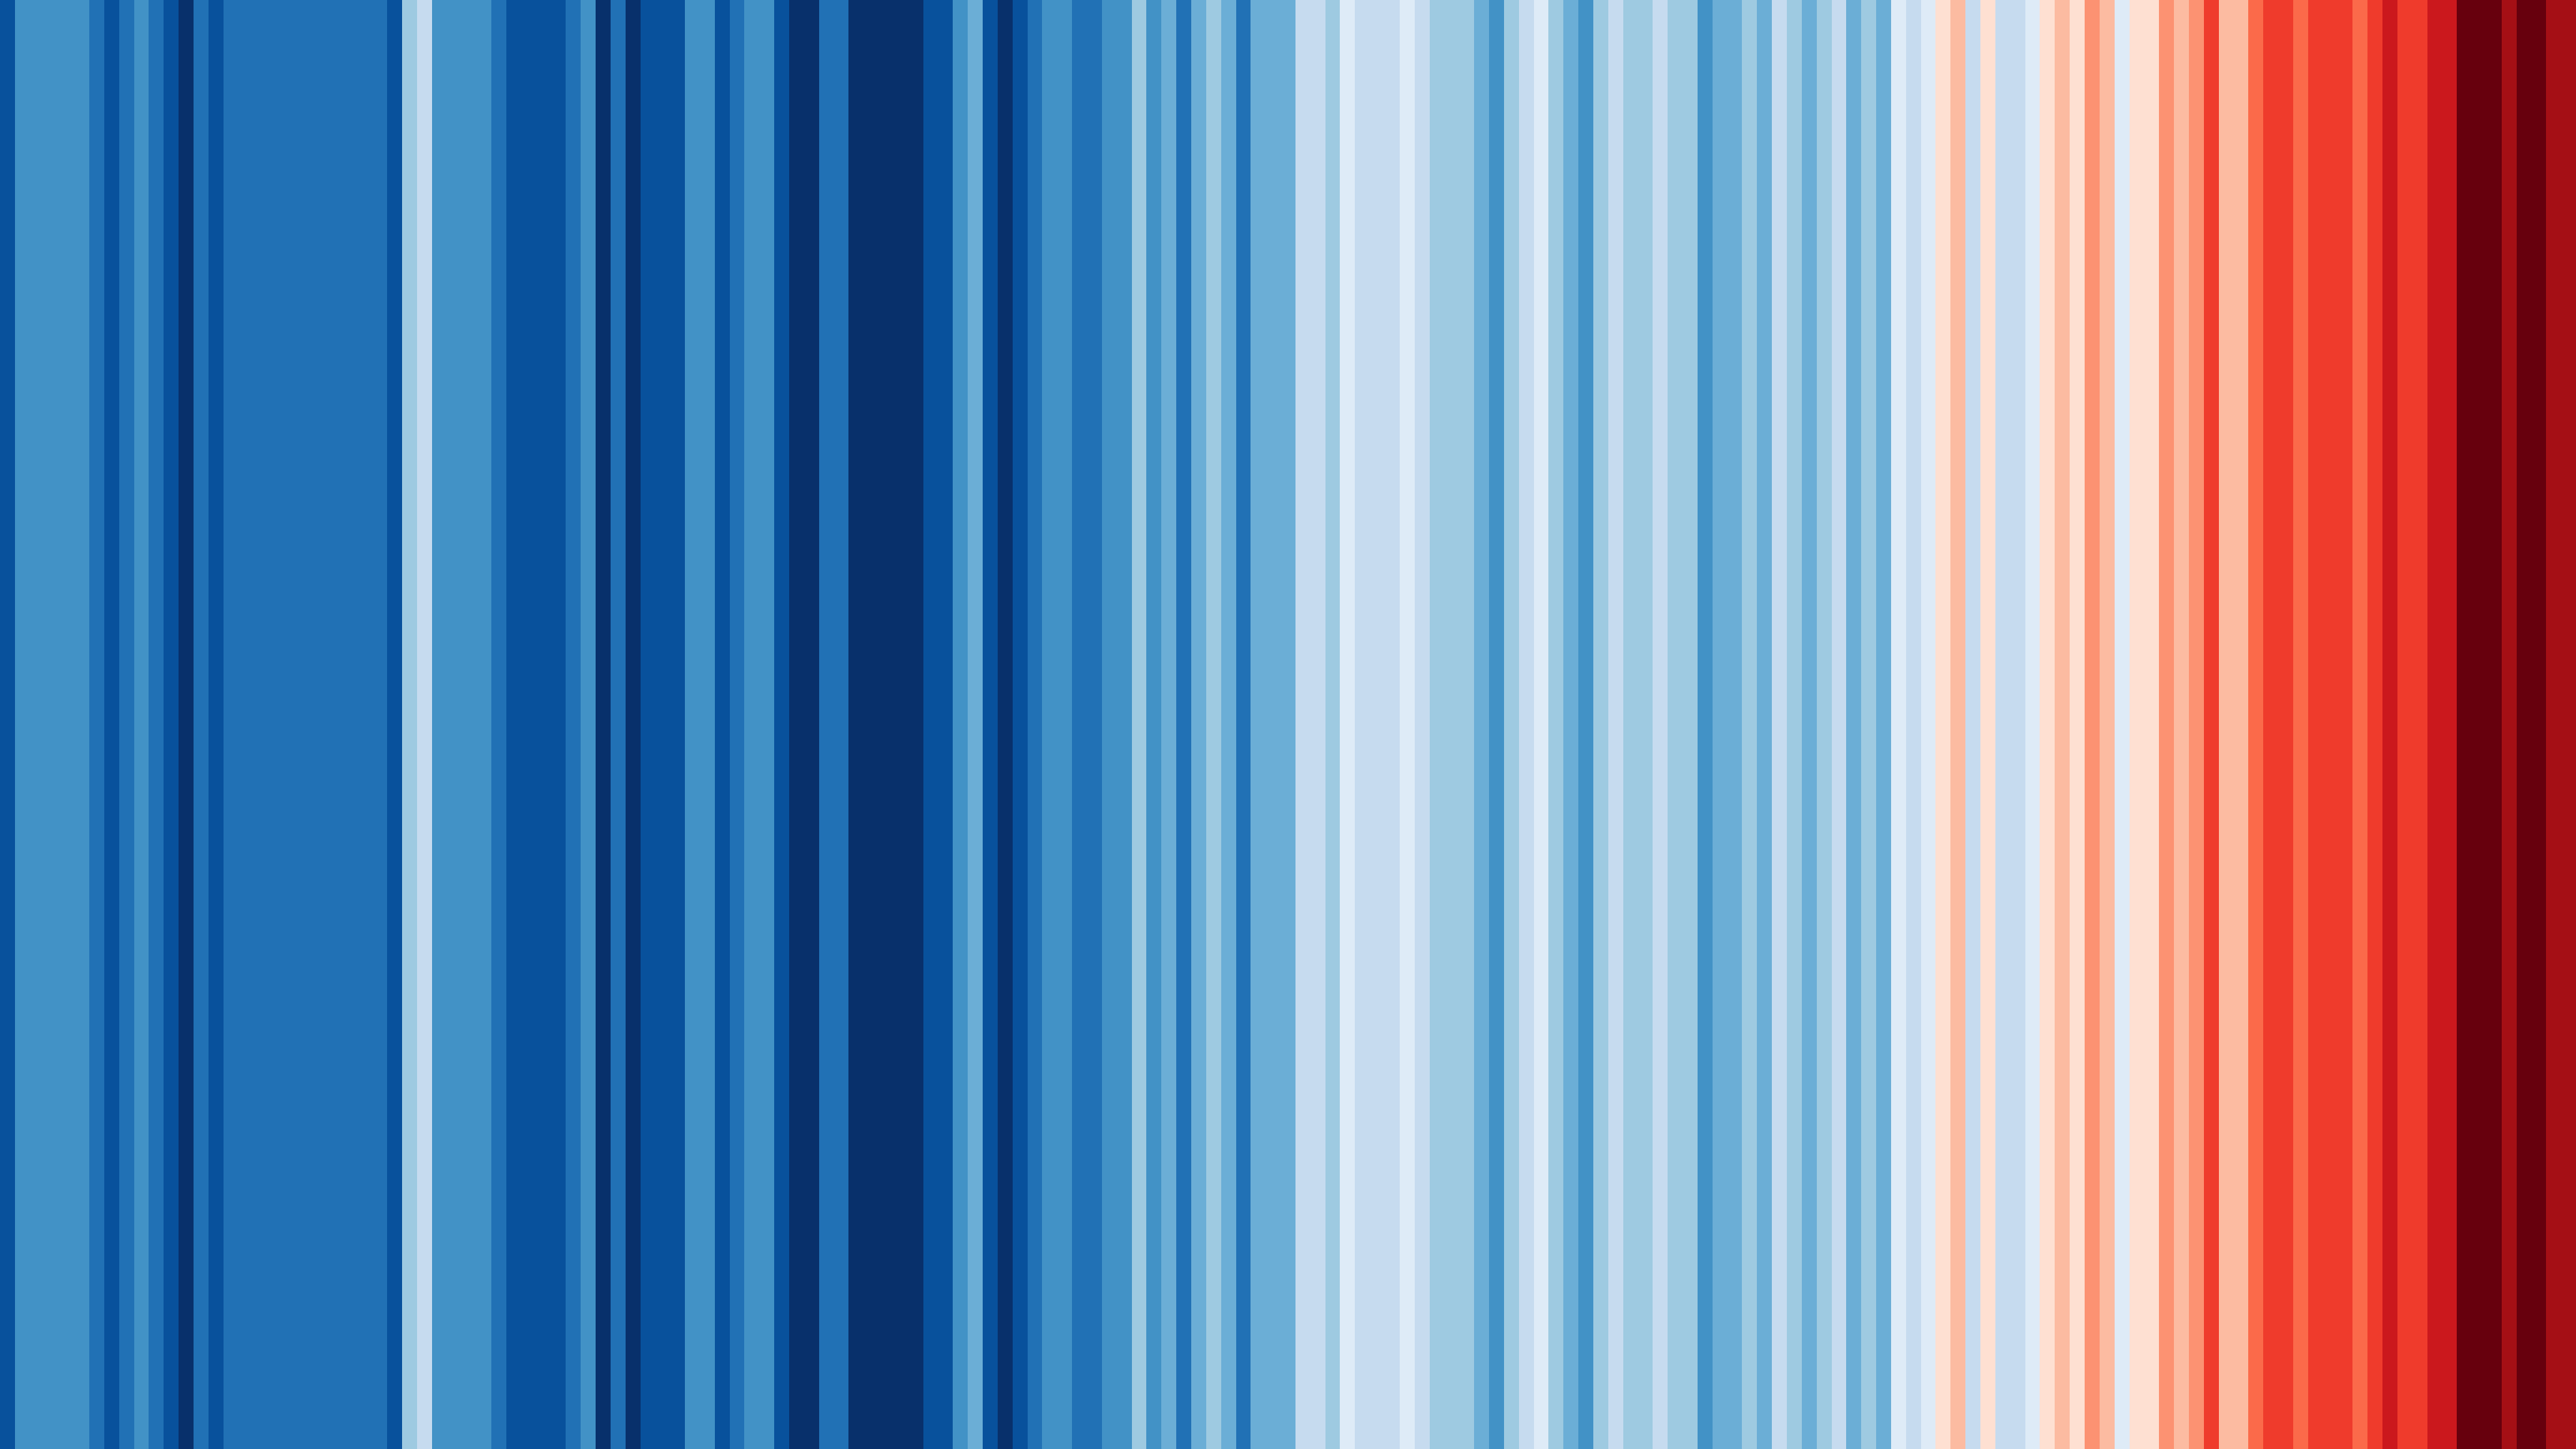 Events: Warming Stripes